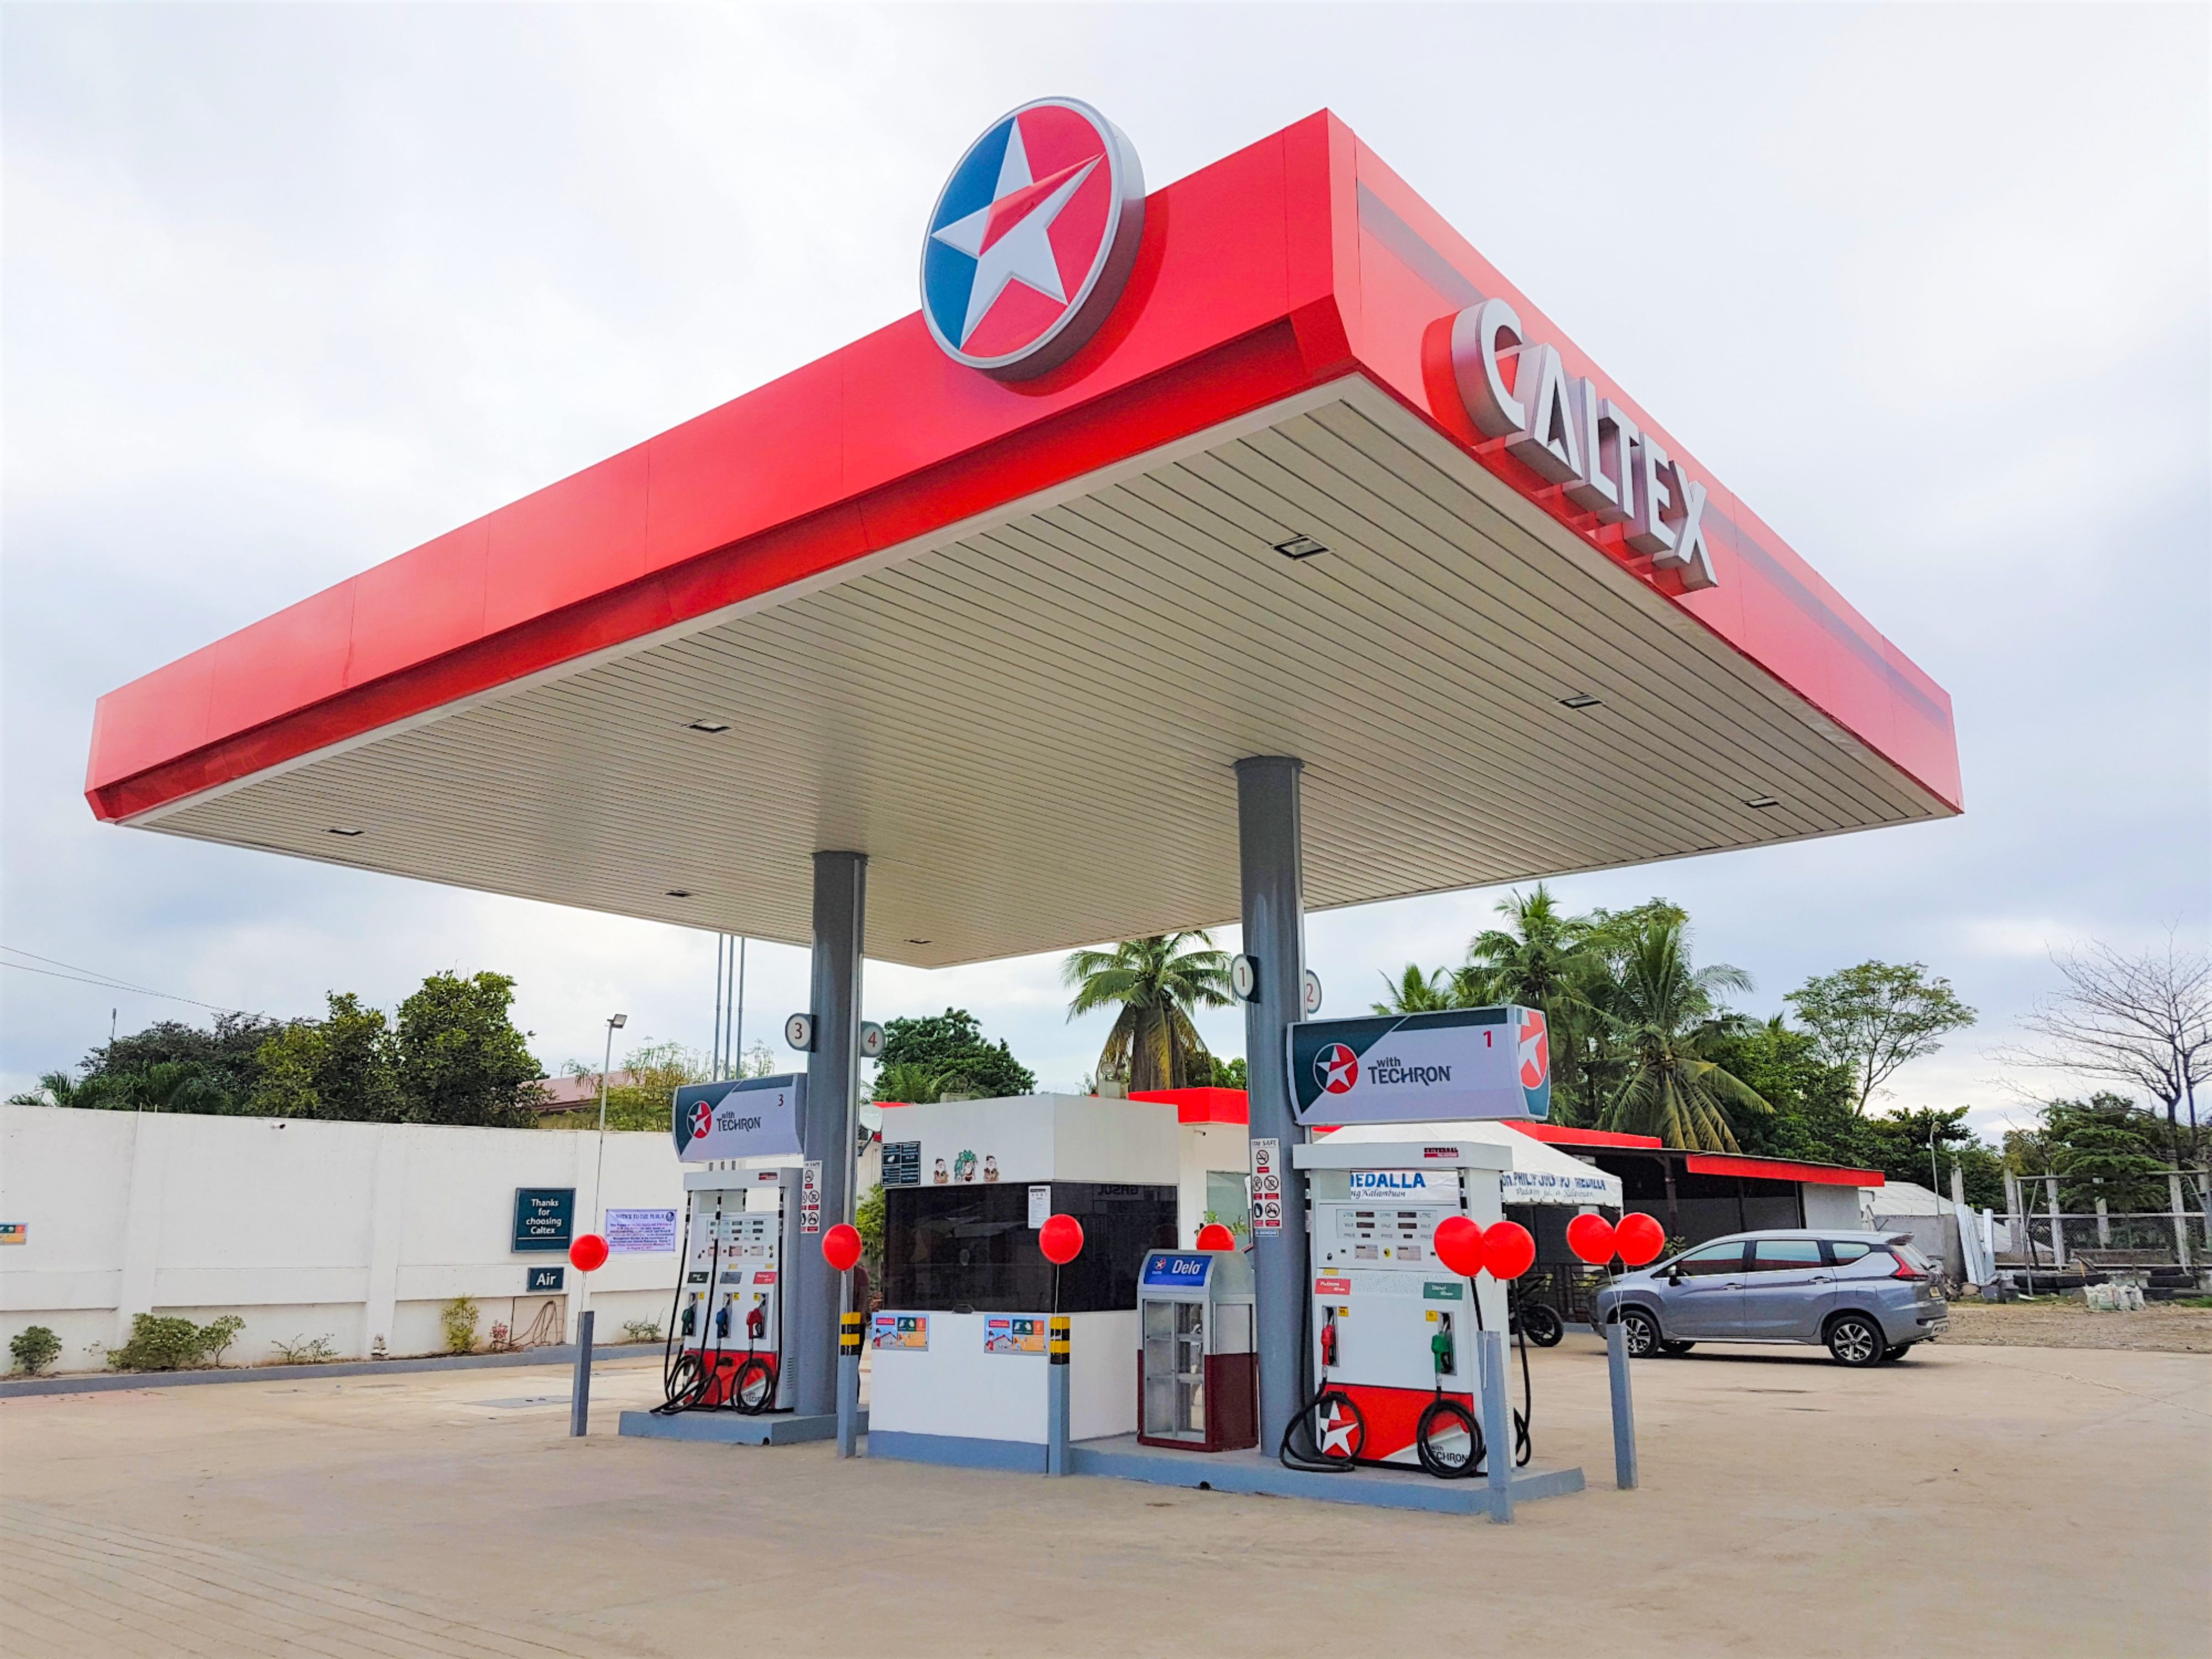 Caltex surges with 11 new stations in last two months to start strong in 2021